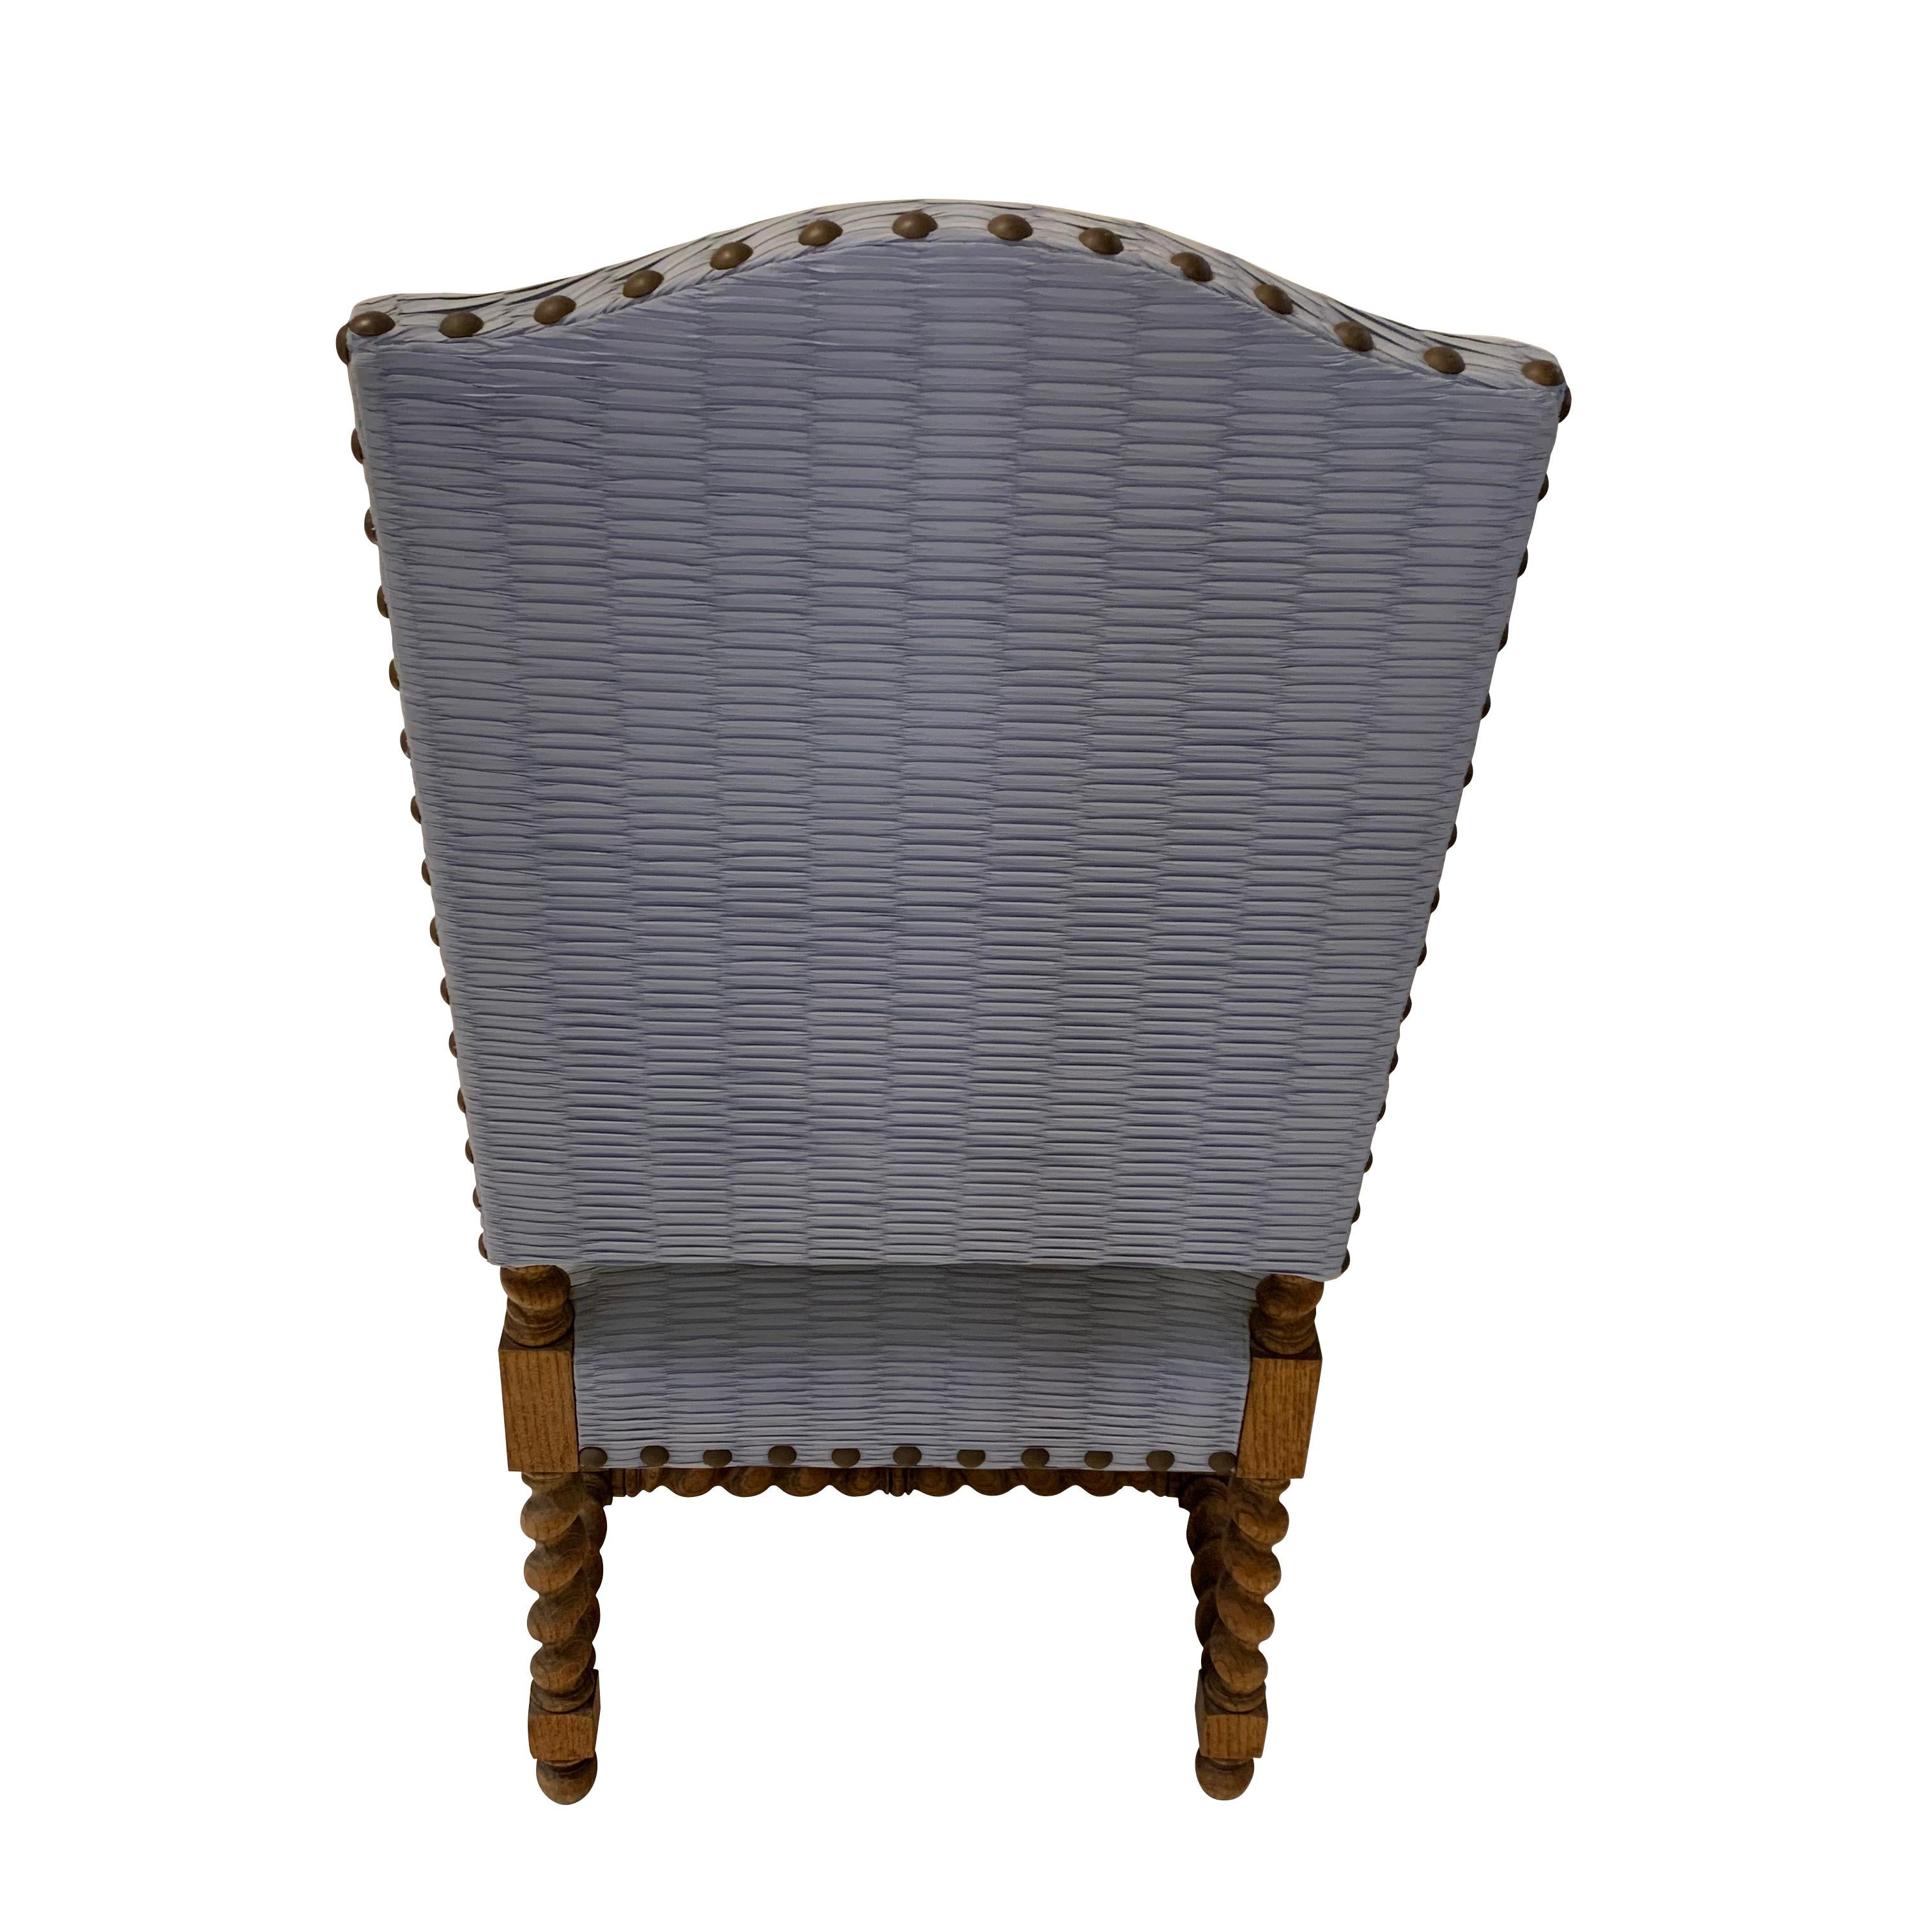 1930s Italian oak high back armchair with curved arms.
The arms are decoratively carved.
Stretchers are spiral.
The chair has been reupholstered in textured blue poly-rayon.
   